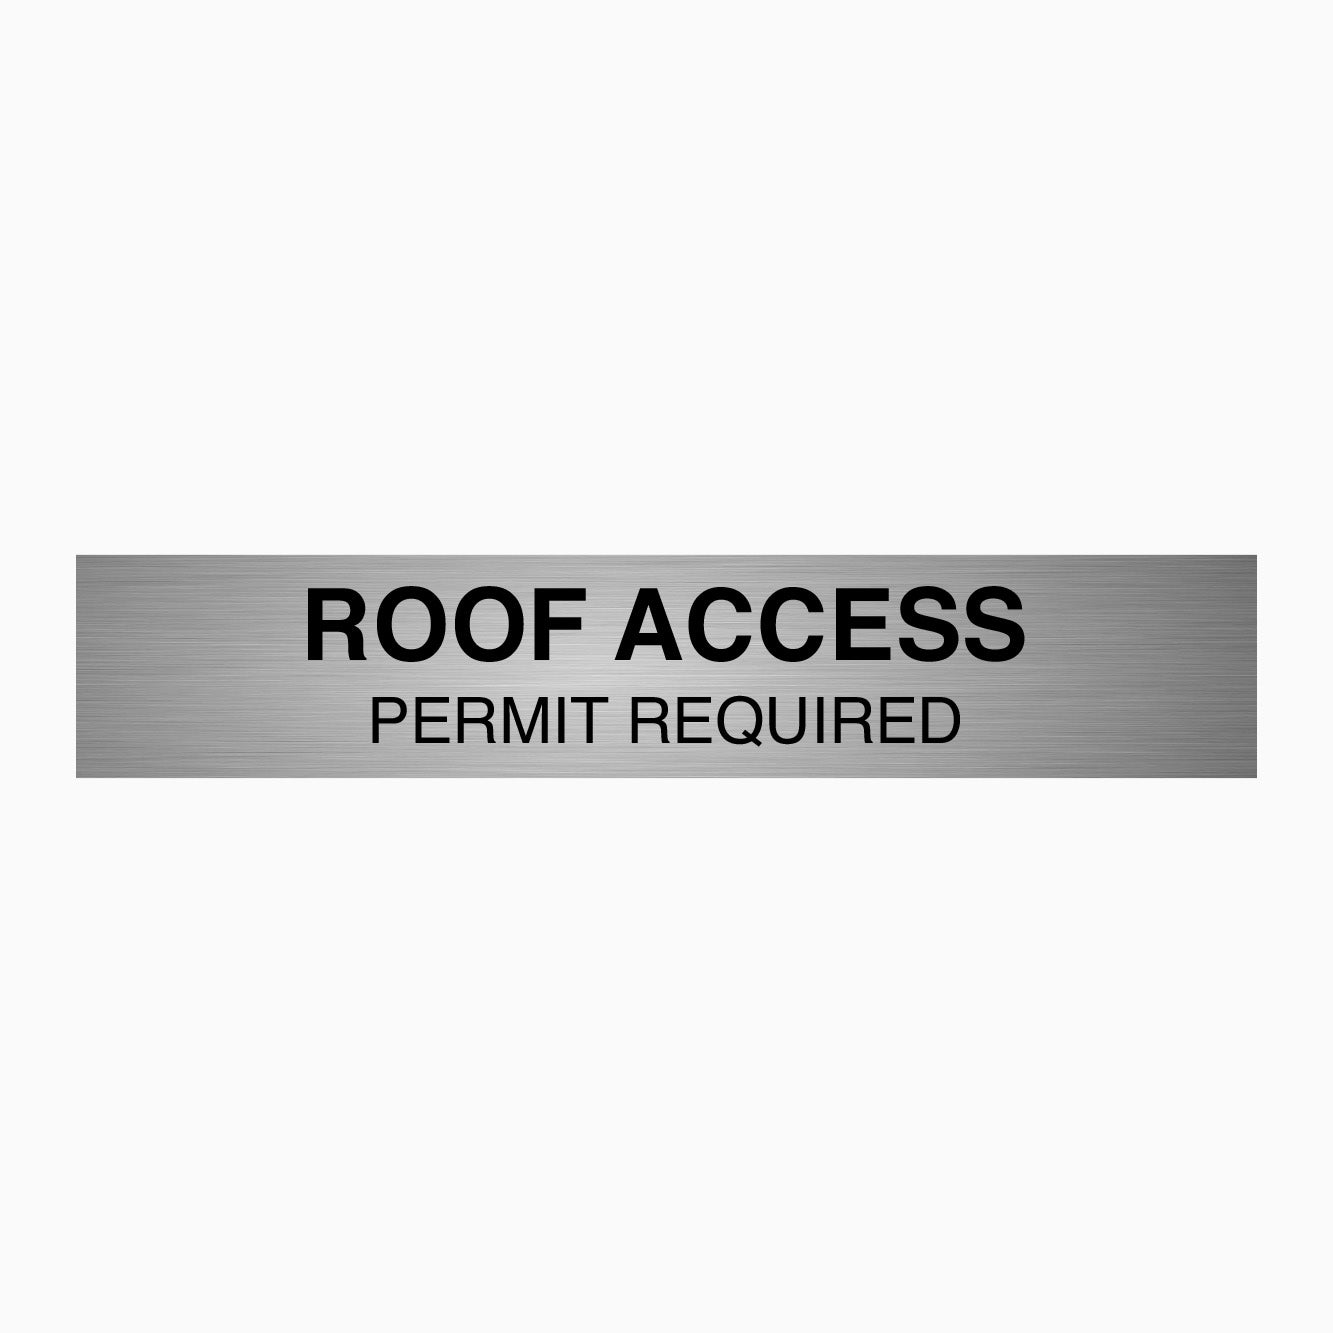 ROOF ACCESS PERMIT REQUIRED SIGN